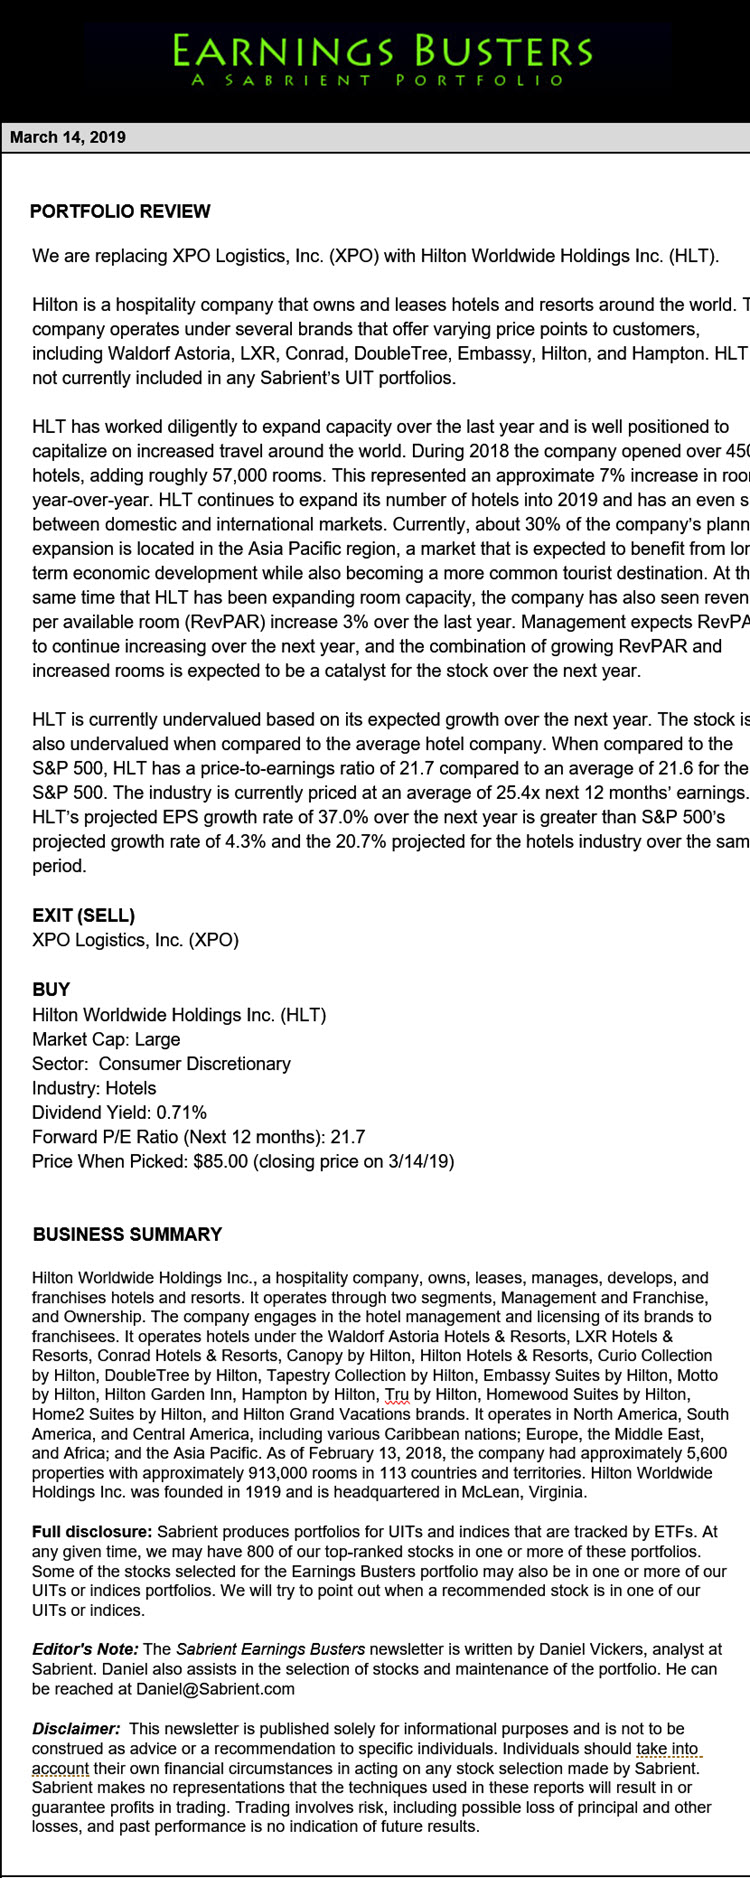 Earnings Busters Newsletter - March 14, 2019